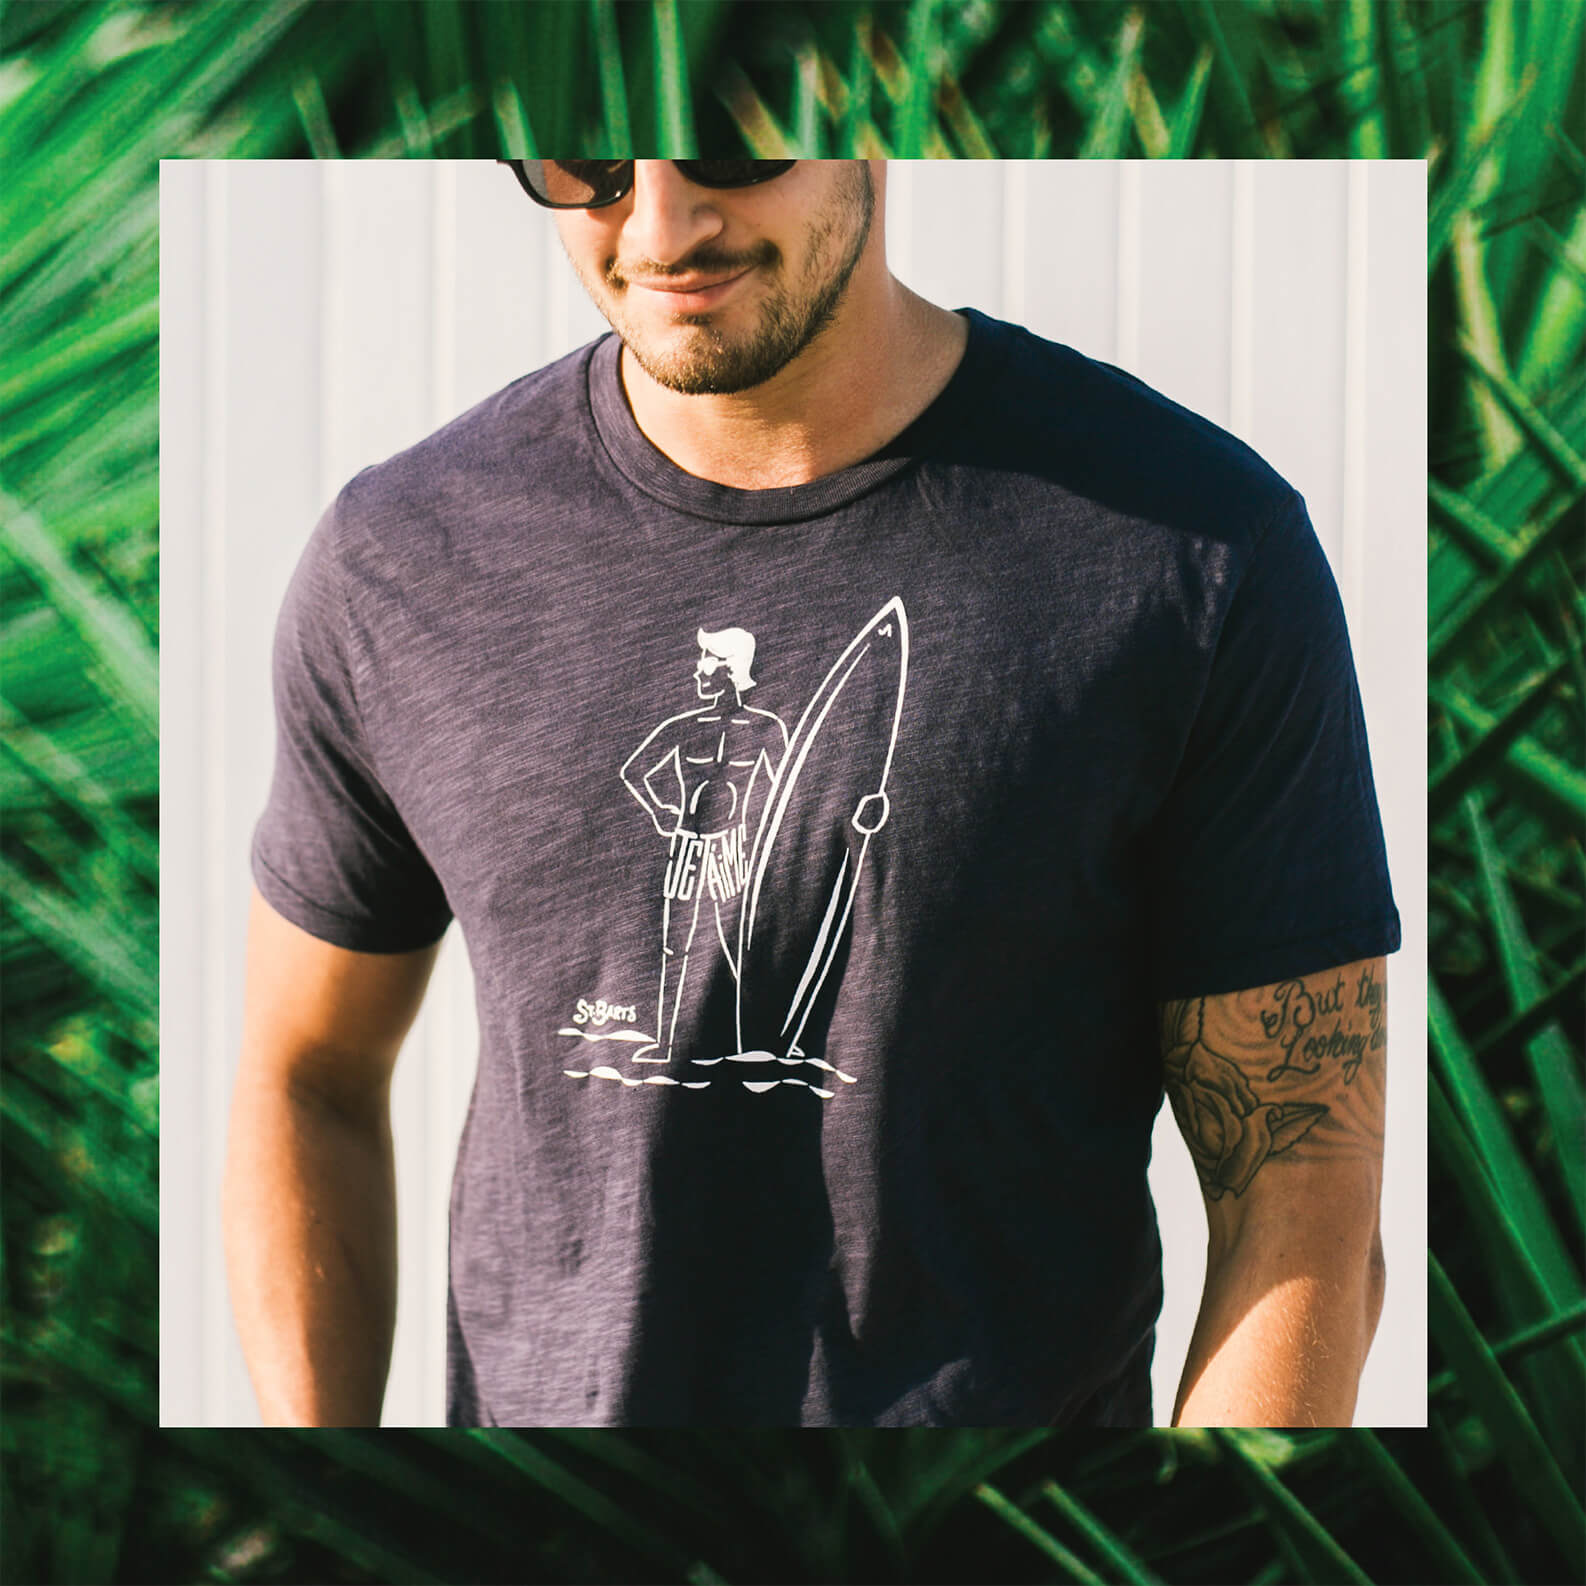 St Barths illustration on a tshirt by Jacober Creative